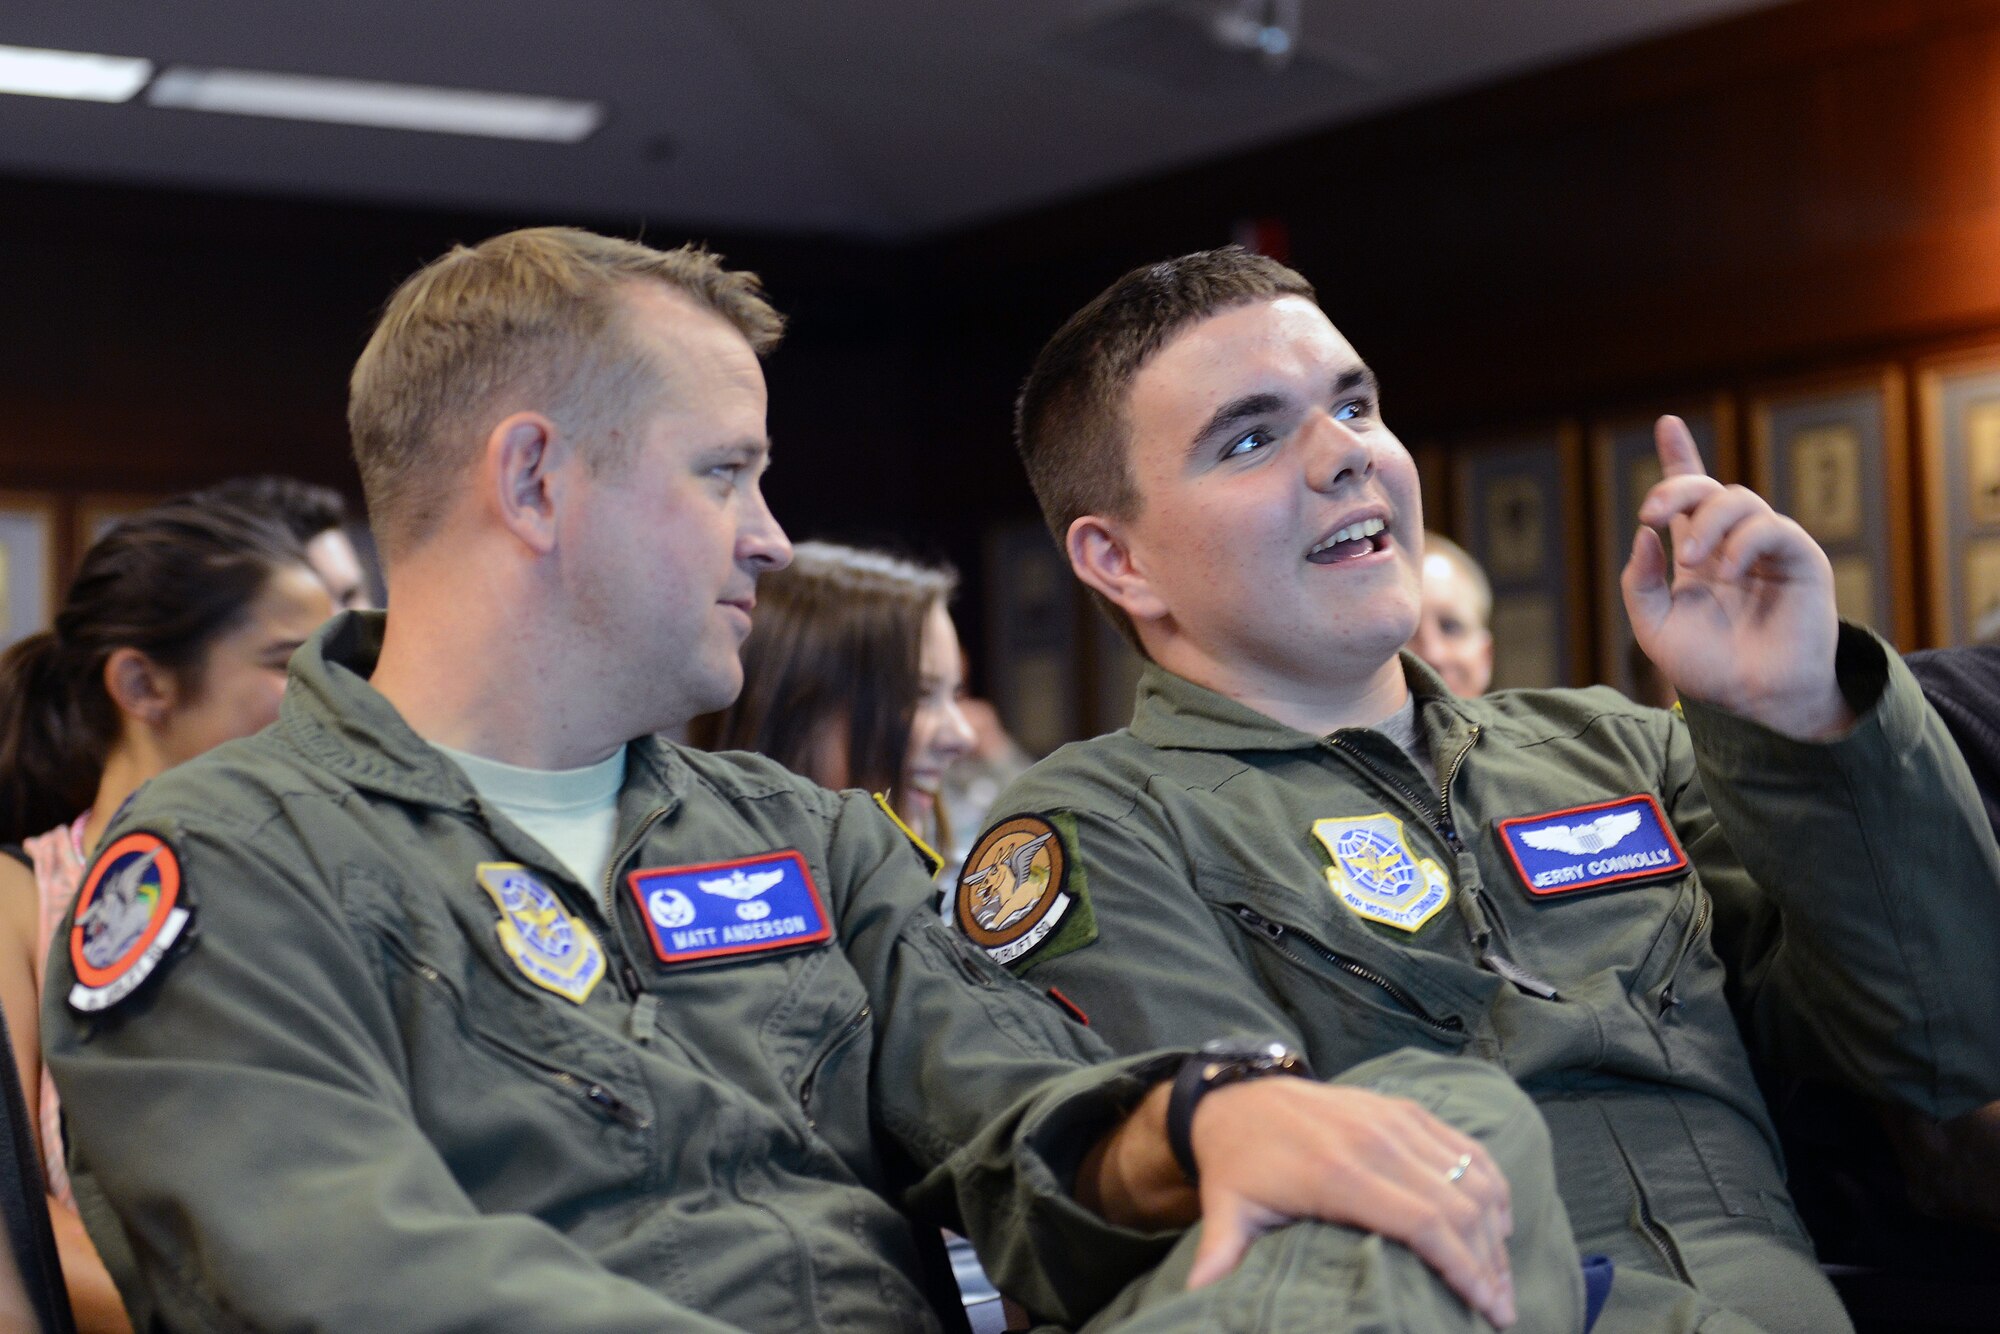 Jerry Connolly (right), pilot for a day, inquires with Lt. Col. Matt Anderson, 4th Airlift Squadron commander, about a secret squirrel mission during a pre-mission briefing July 14, 2014, at Joint Base Lewis-McChord, Wash. Connolly was given an in-depth briefing on his special mission before going to the C-17 Globemaster III simulator. (U.S. Air Force photo/Airman 1st Class Jacob Jimenez)